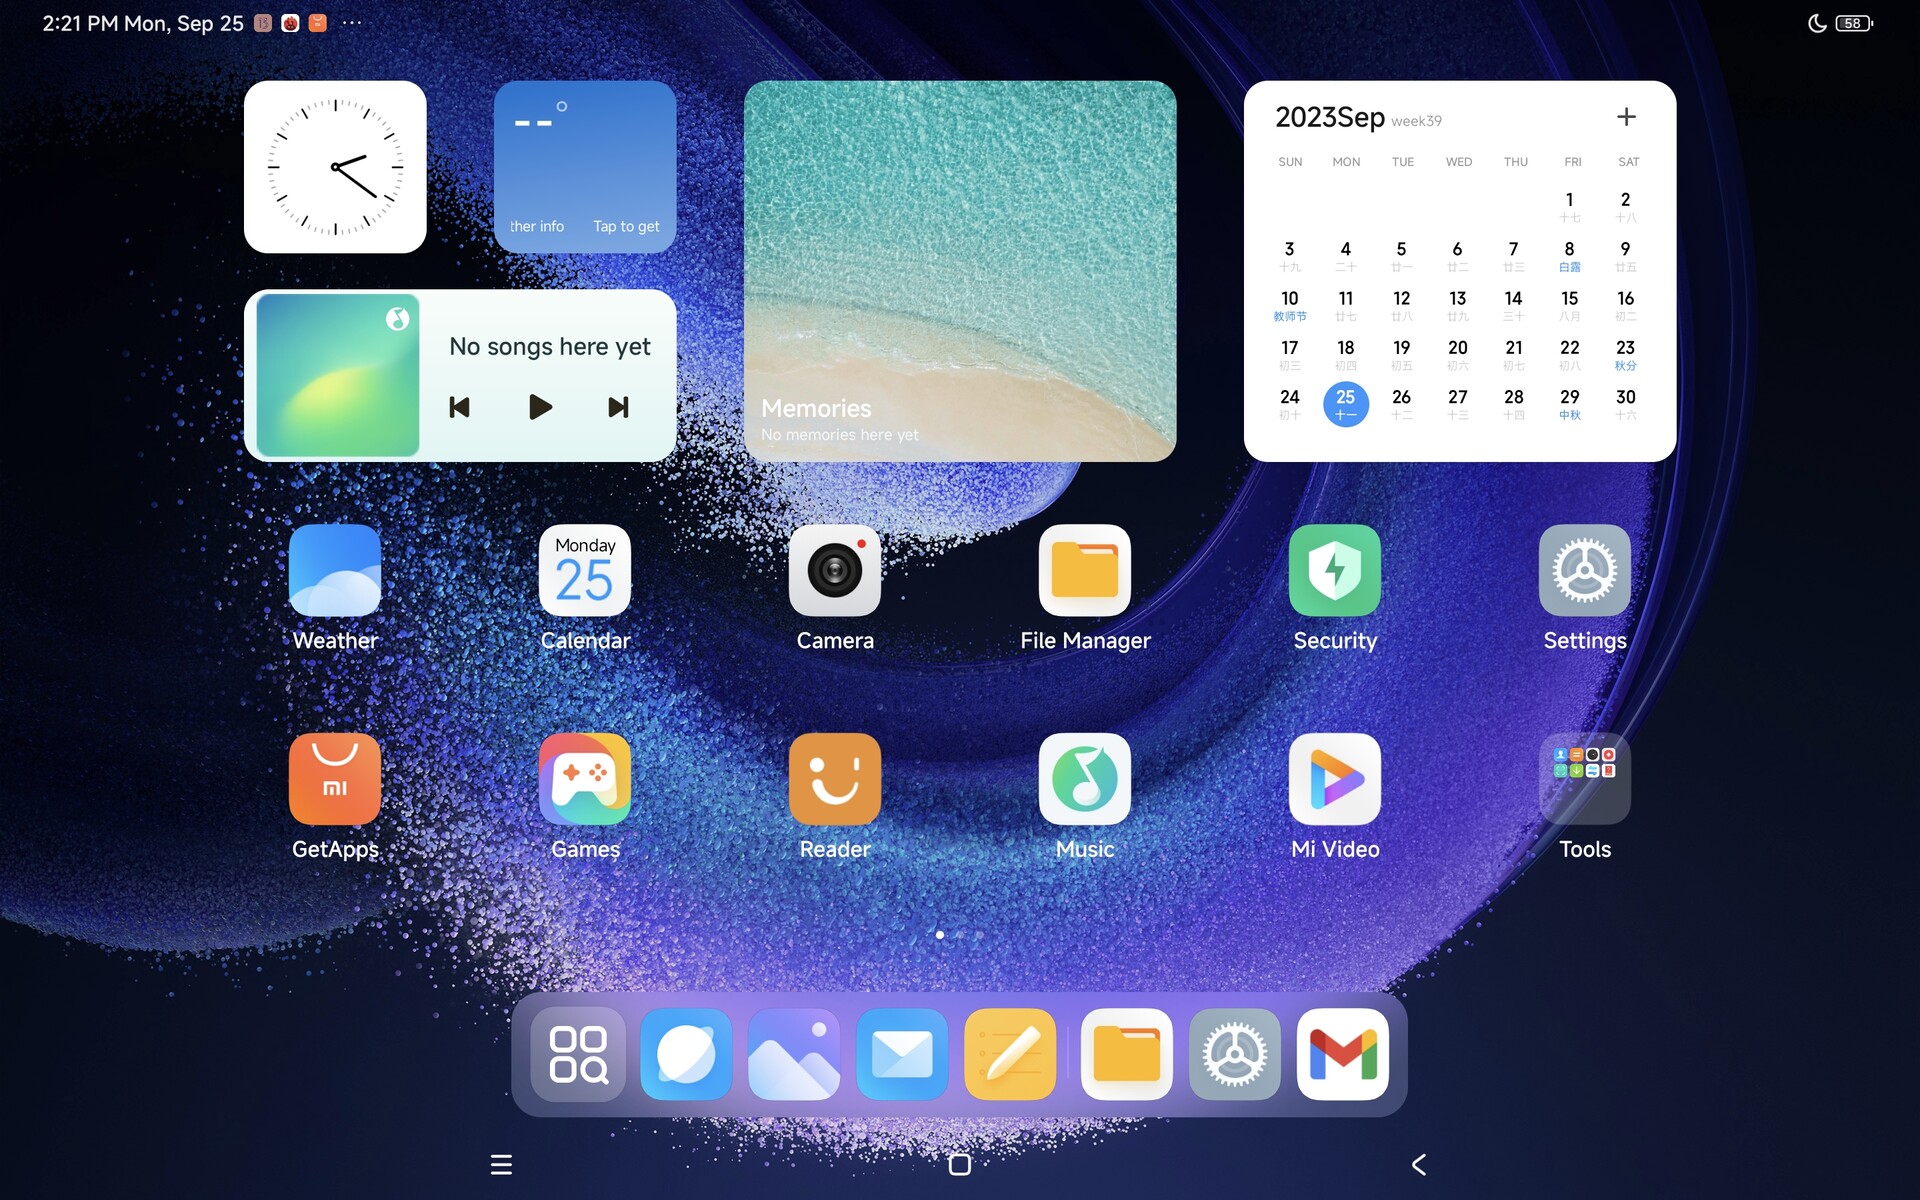 Xiaomi Pad 6 Max August 14 launch officially teased, design unveiled -  Gizmochina